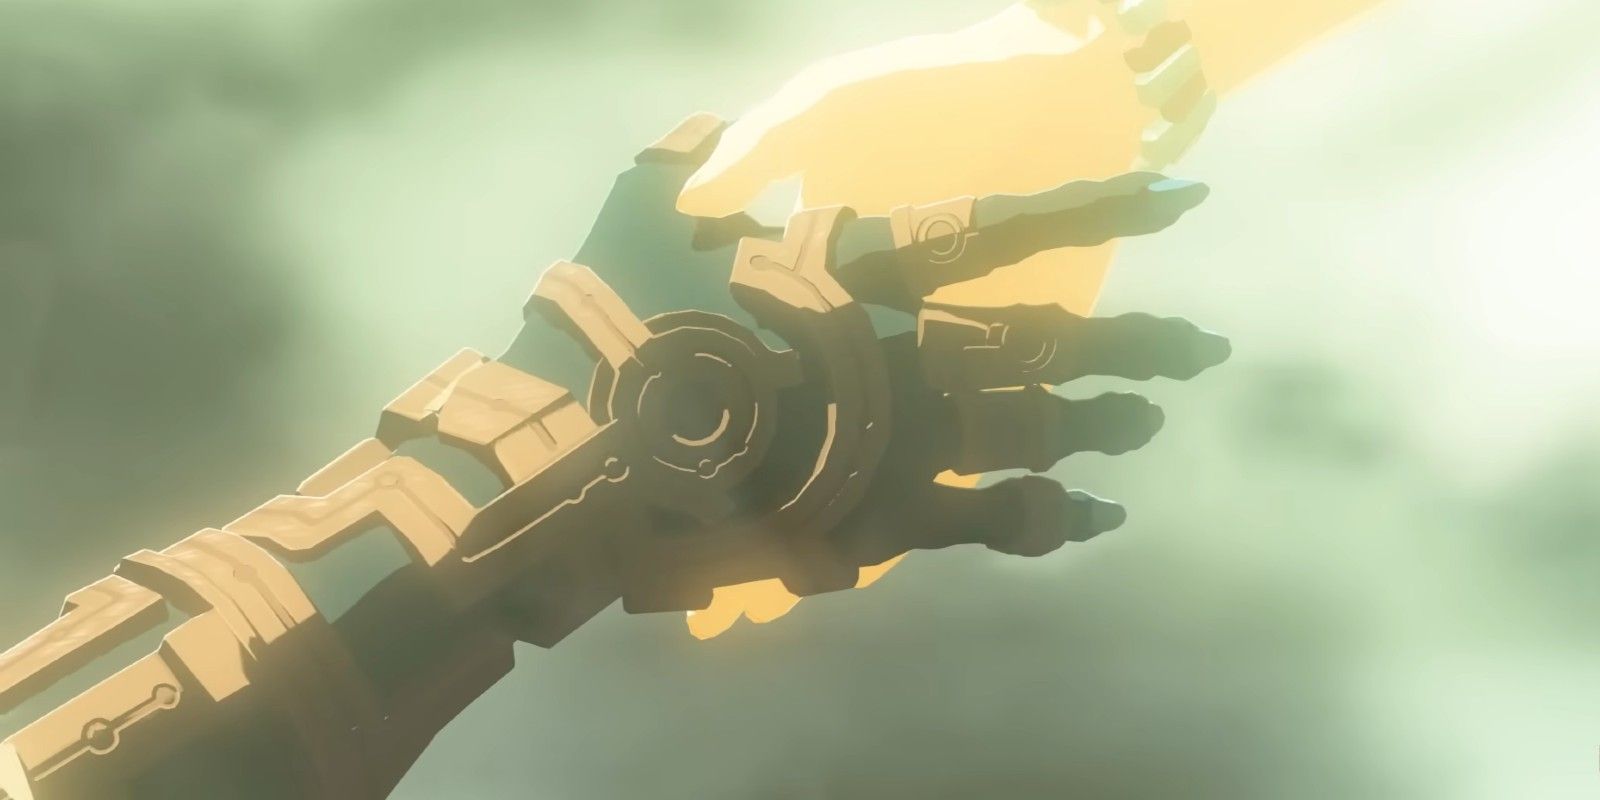 Zonai and Hylian hands reach out towards each other in The Legend of Zelda: Tears of the Kingdom.